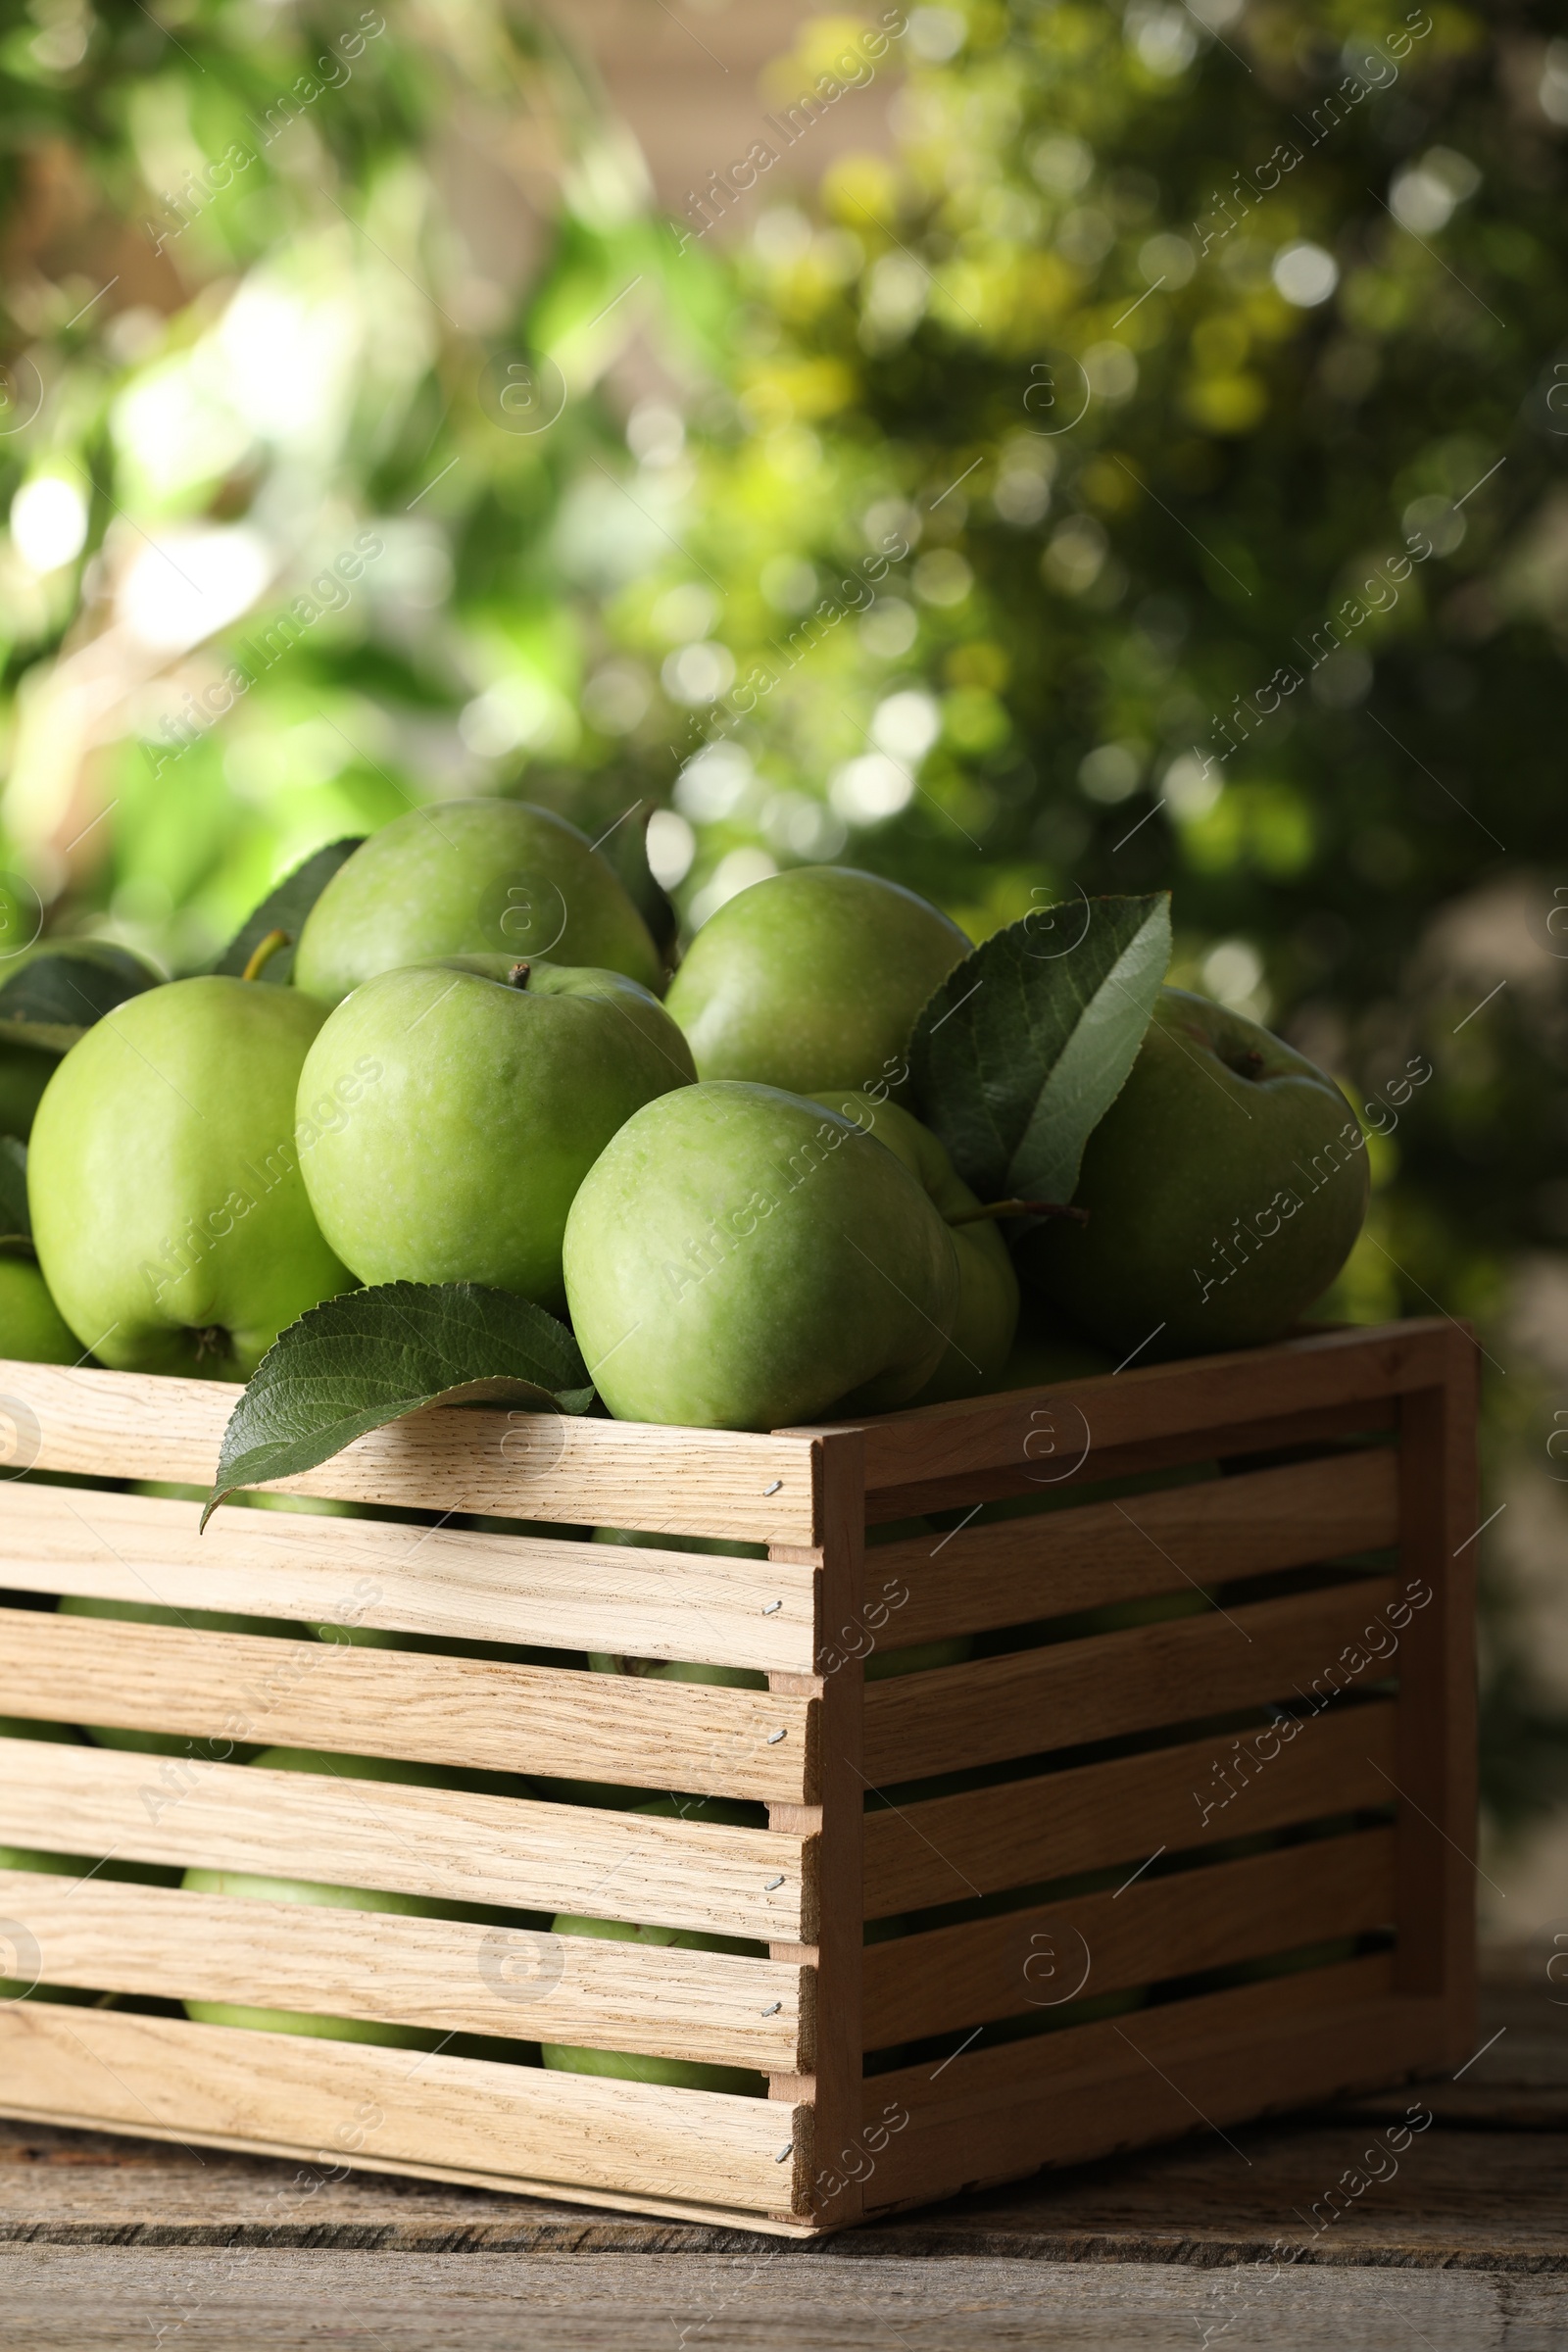 Photo of Crate full of ripe green apples and leaves on wooden table outdoors